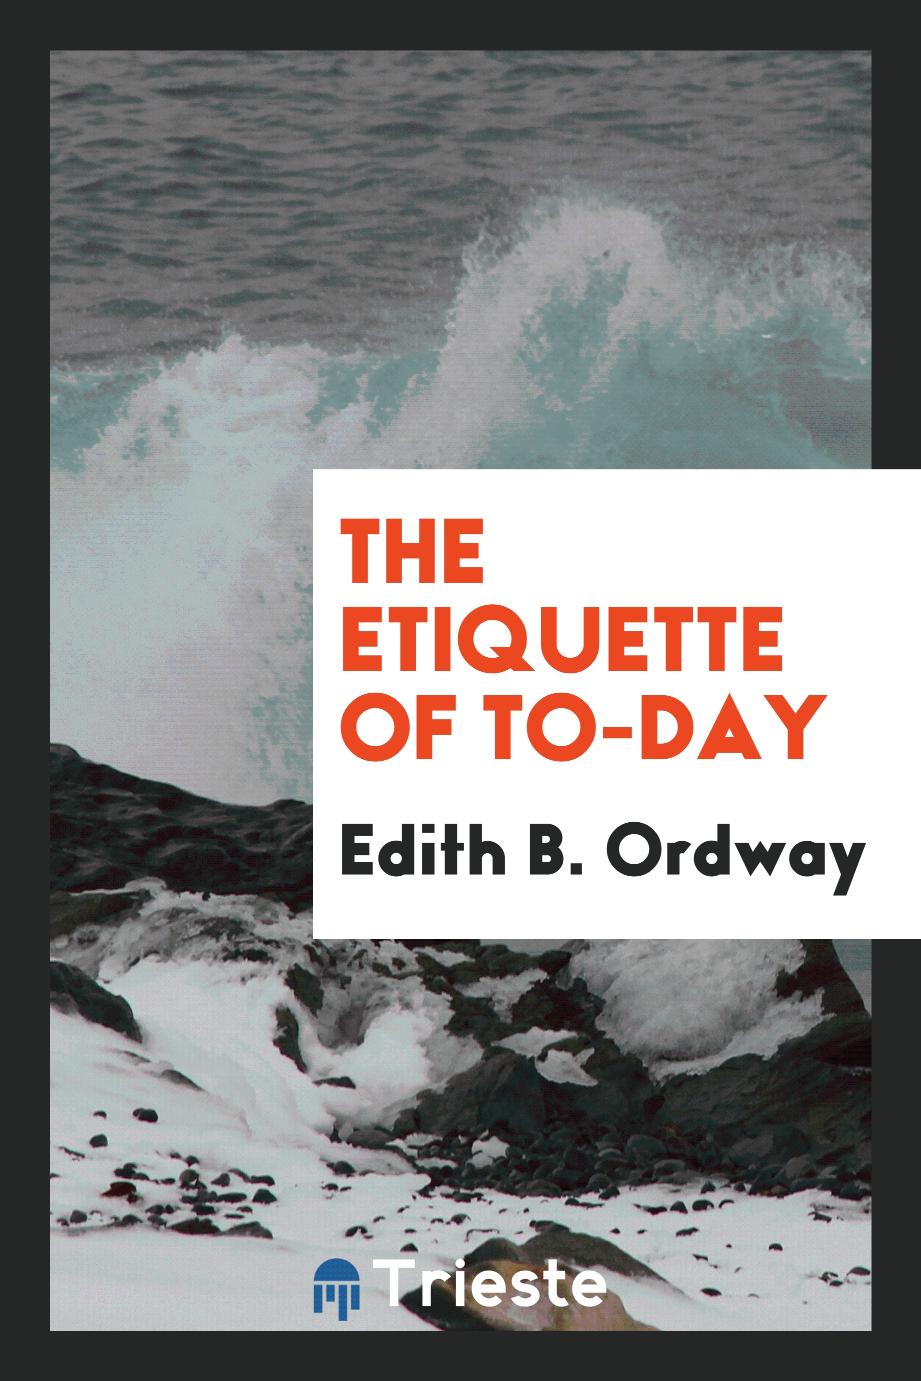 The etiquette of to-day